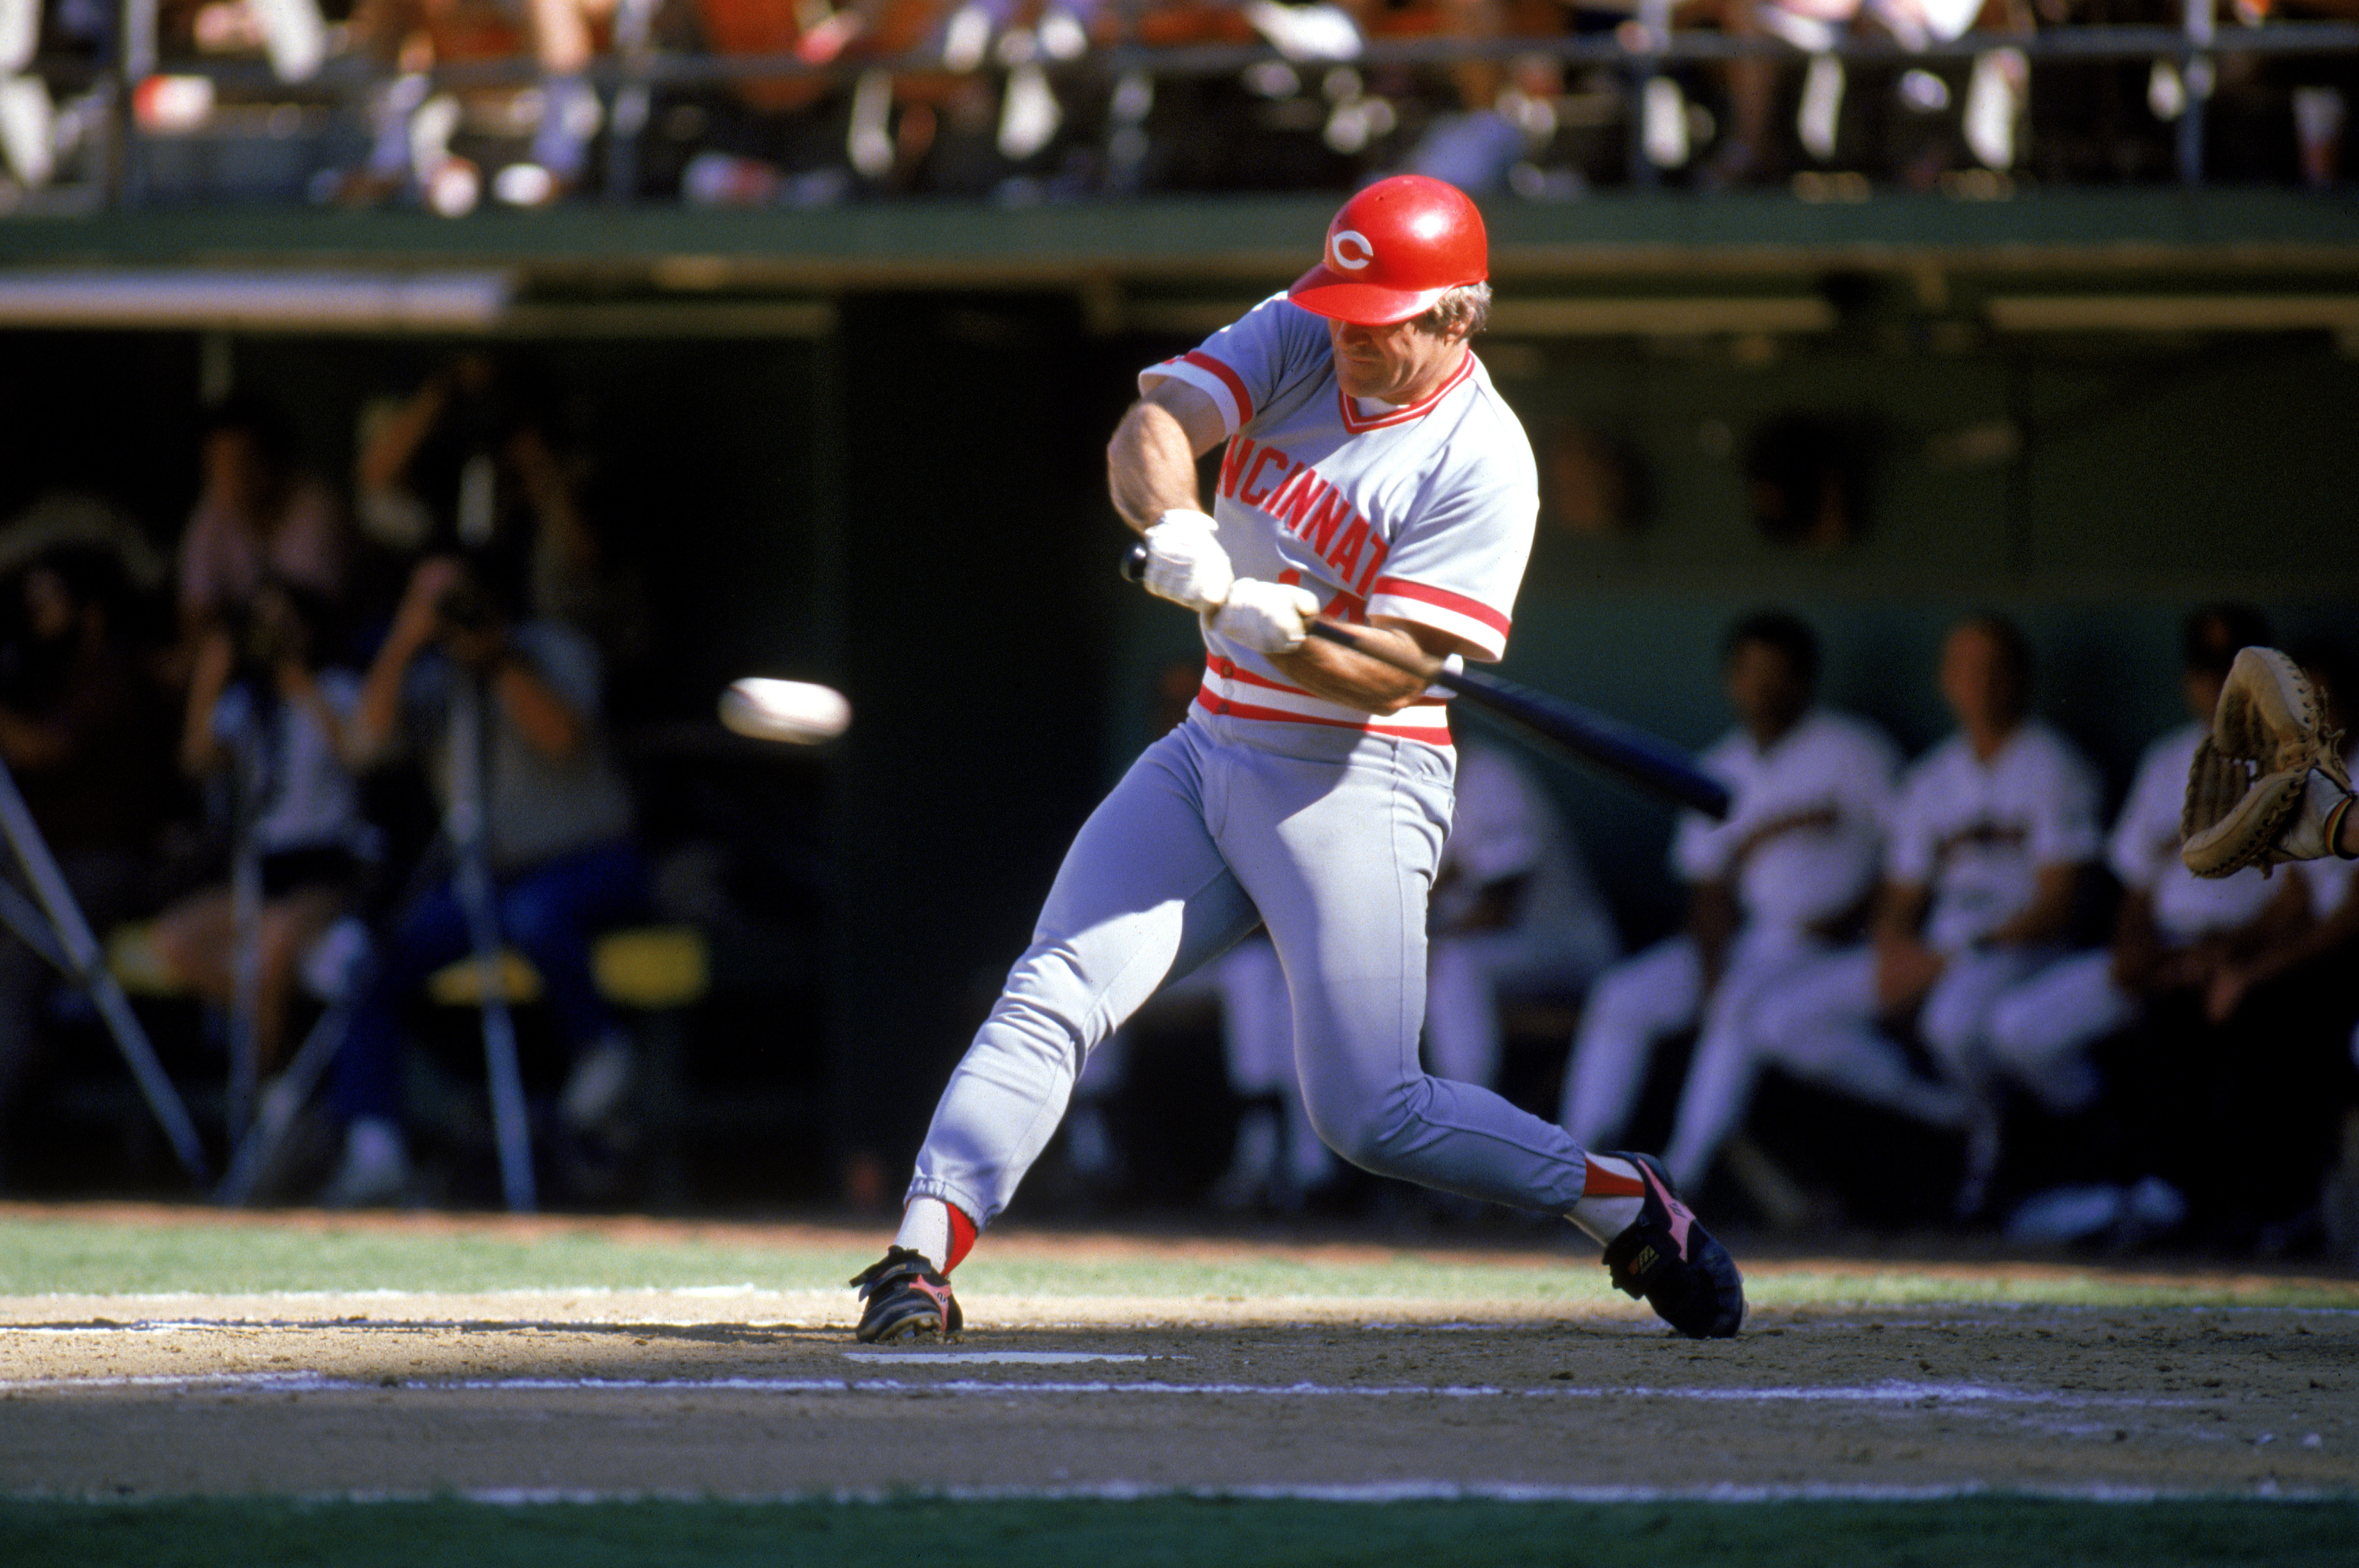 1985:  Pete Rose of the Cincinnati Reds swings at the pitch during a MLB game in the 1985 season. ( Photo by: Stephen Dunn/Getty Images)